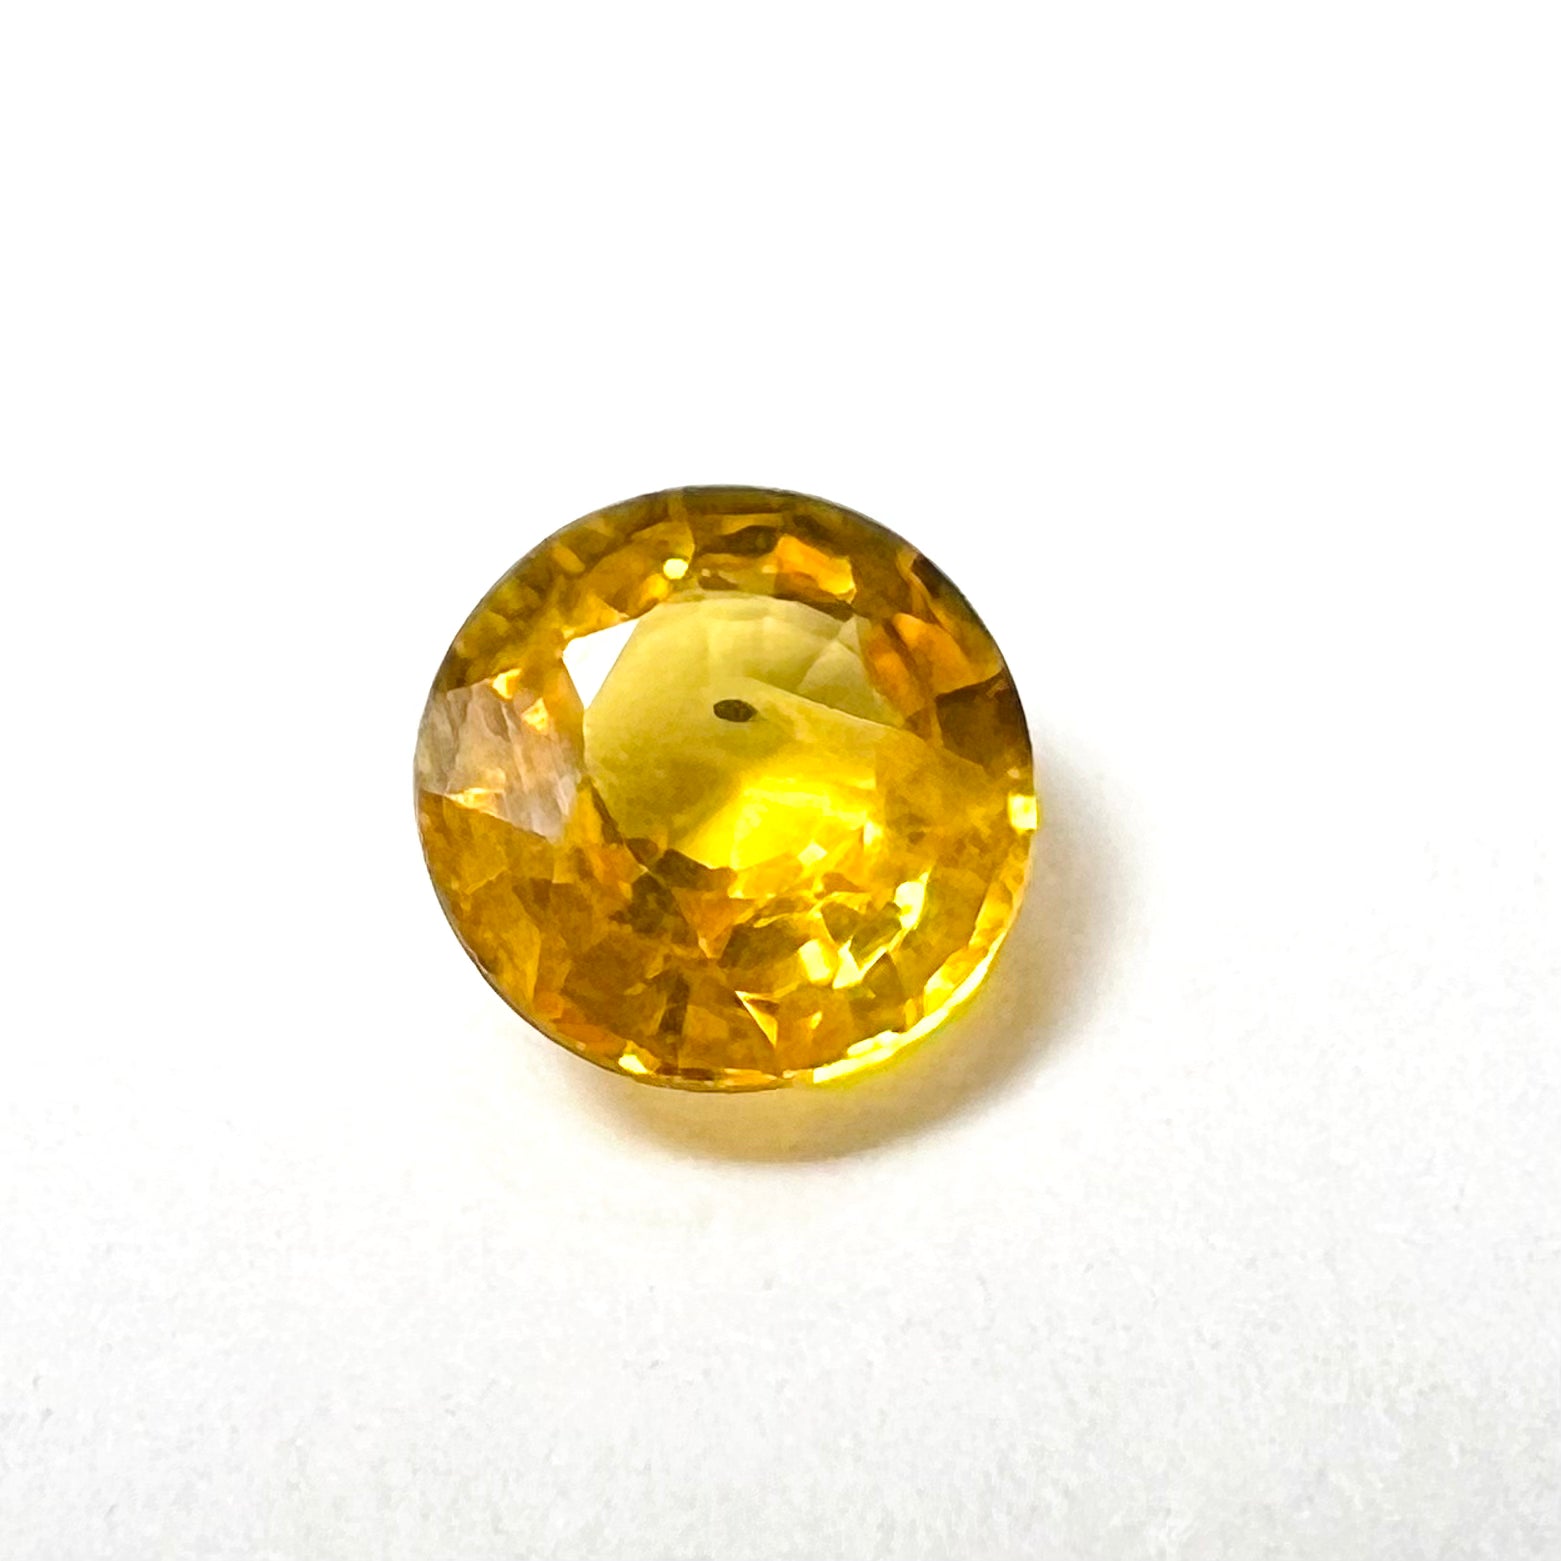 .56CT Loose Natural Round Sapphire 5x2.5mm Earth mined Gemstone